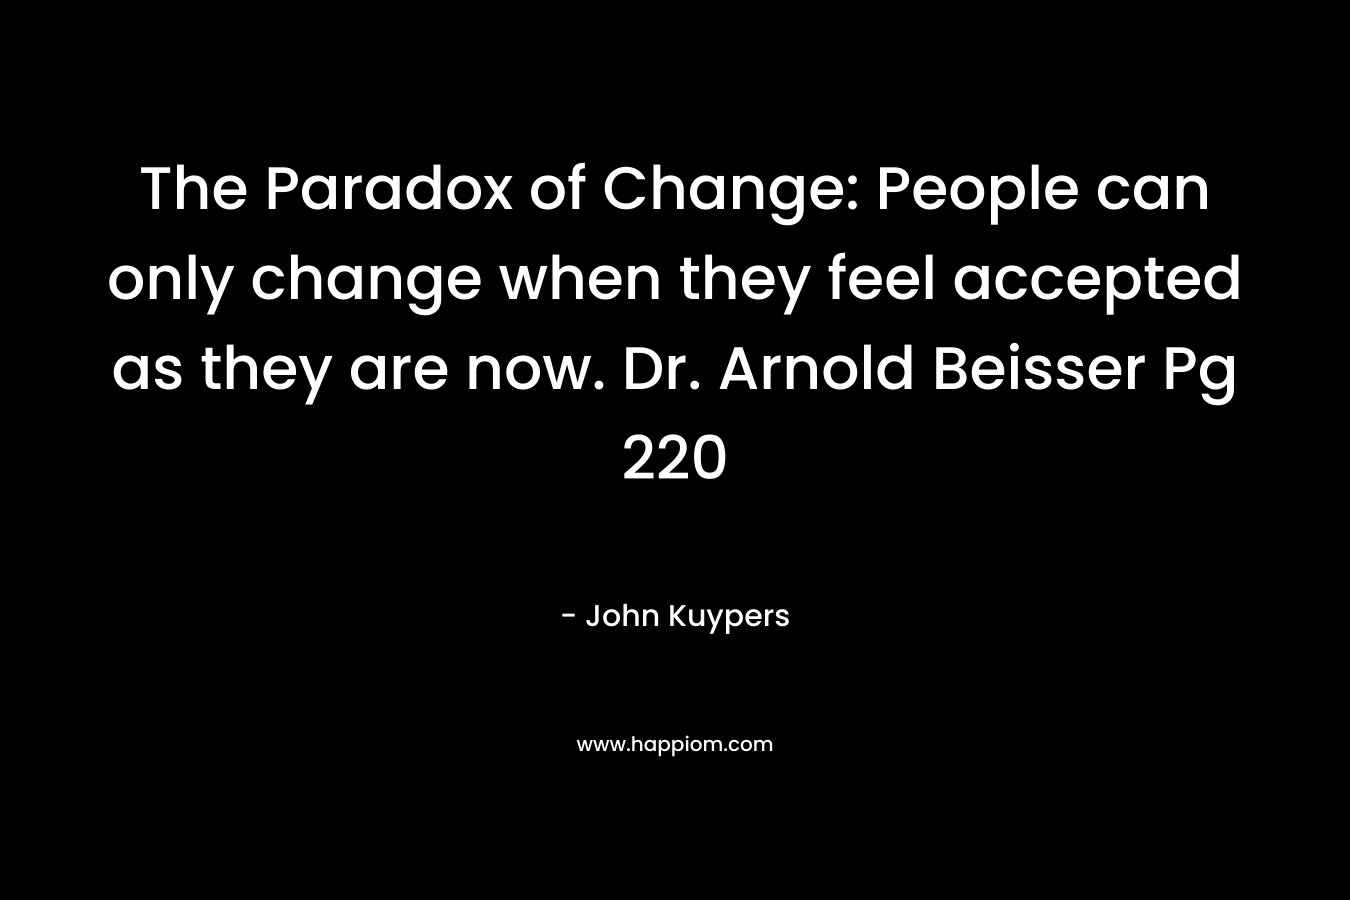 The Paradox of Change: People can only change when they feel accepted as they are now. Dr. Arnold Beisser Pg 220 – John Kuypers